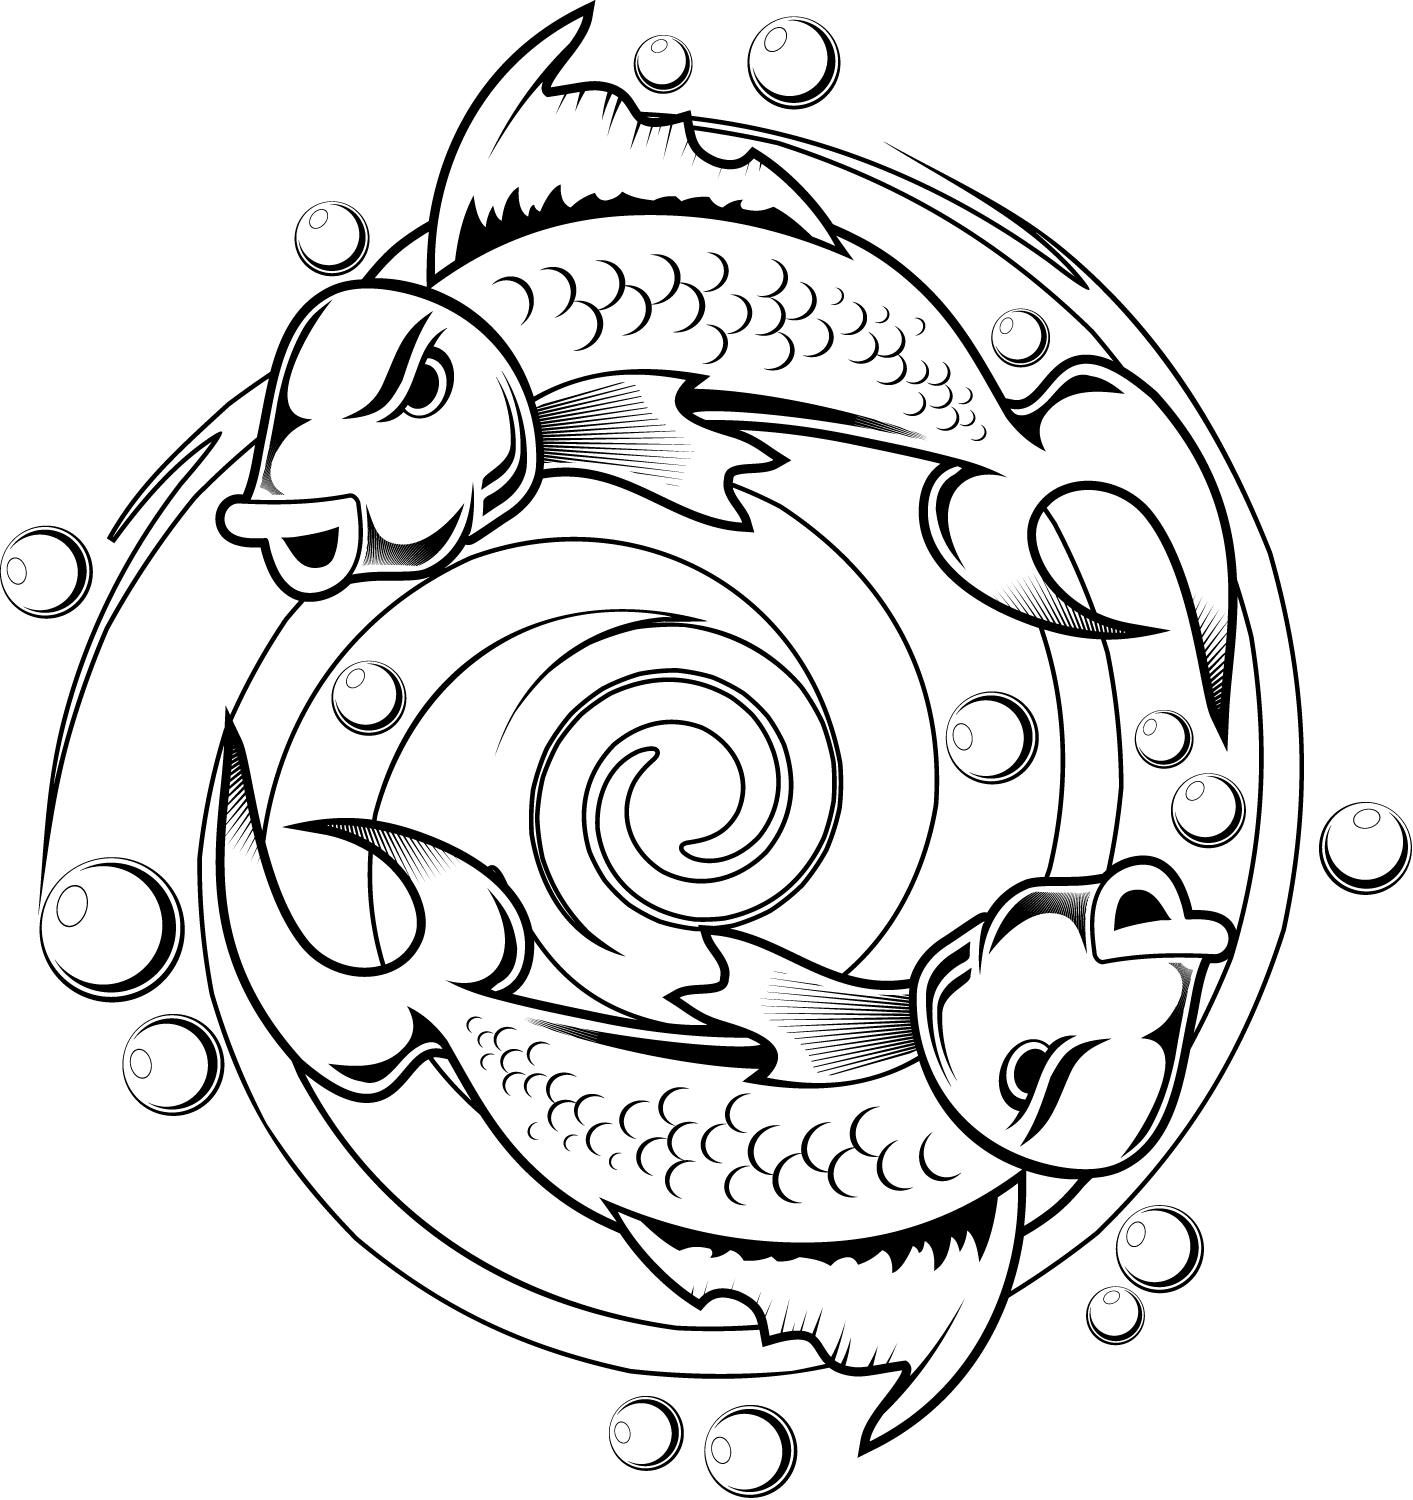 kids coloring pages of a koi fish tattoo design - Coloring Point